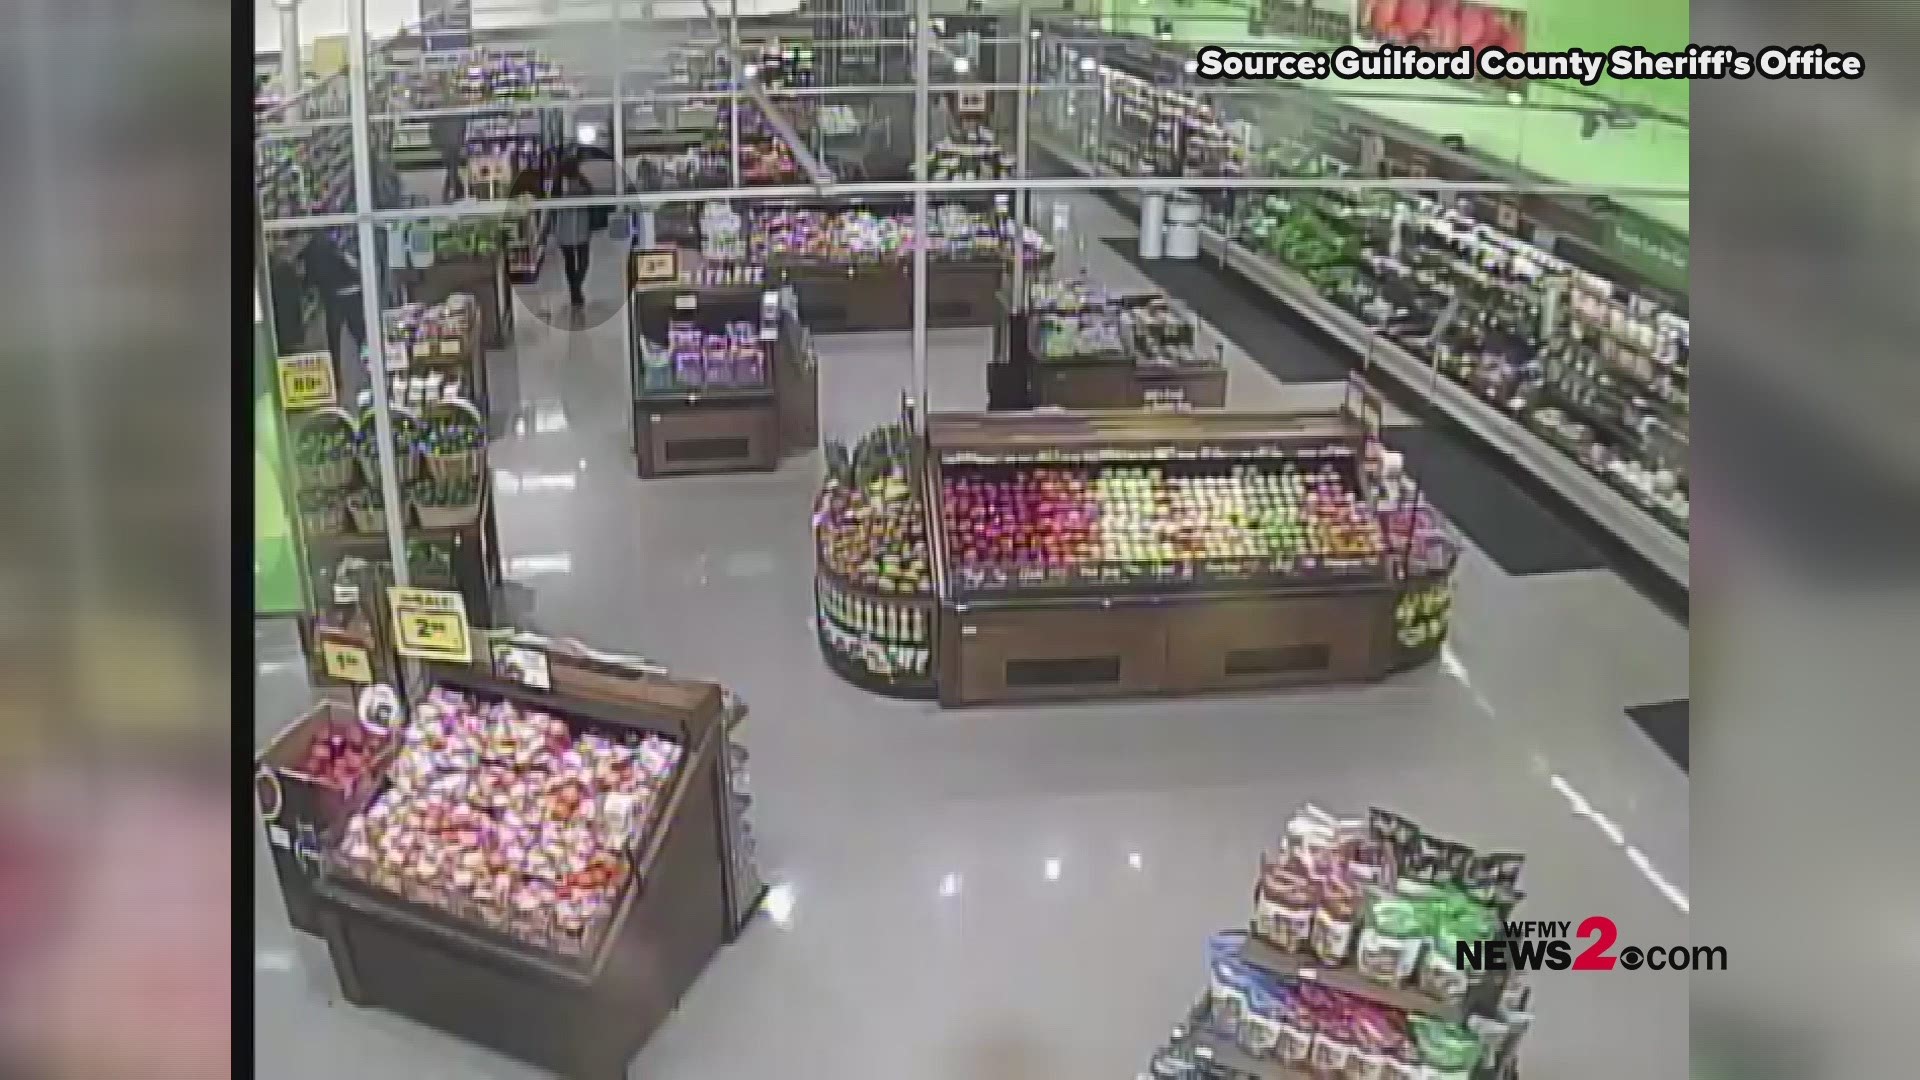 Guilford Co. detectives released surveillance video that appears to show a woman placing something in her shopping basket. In the last clip, she leaves with a purse.